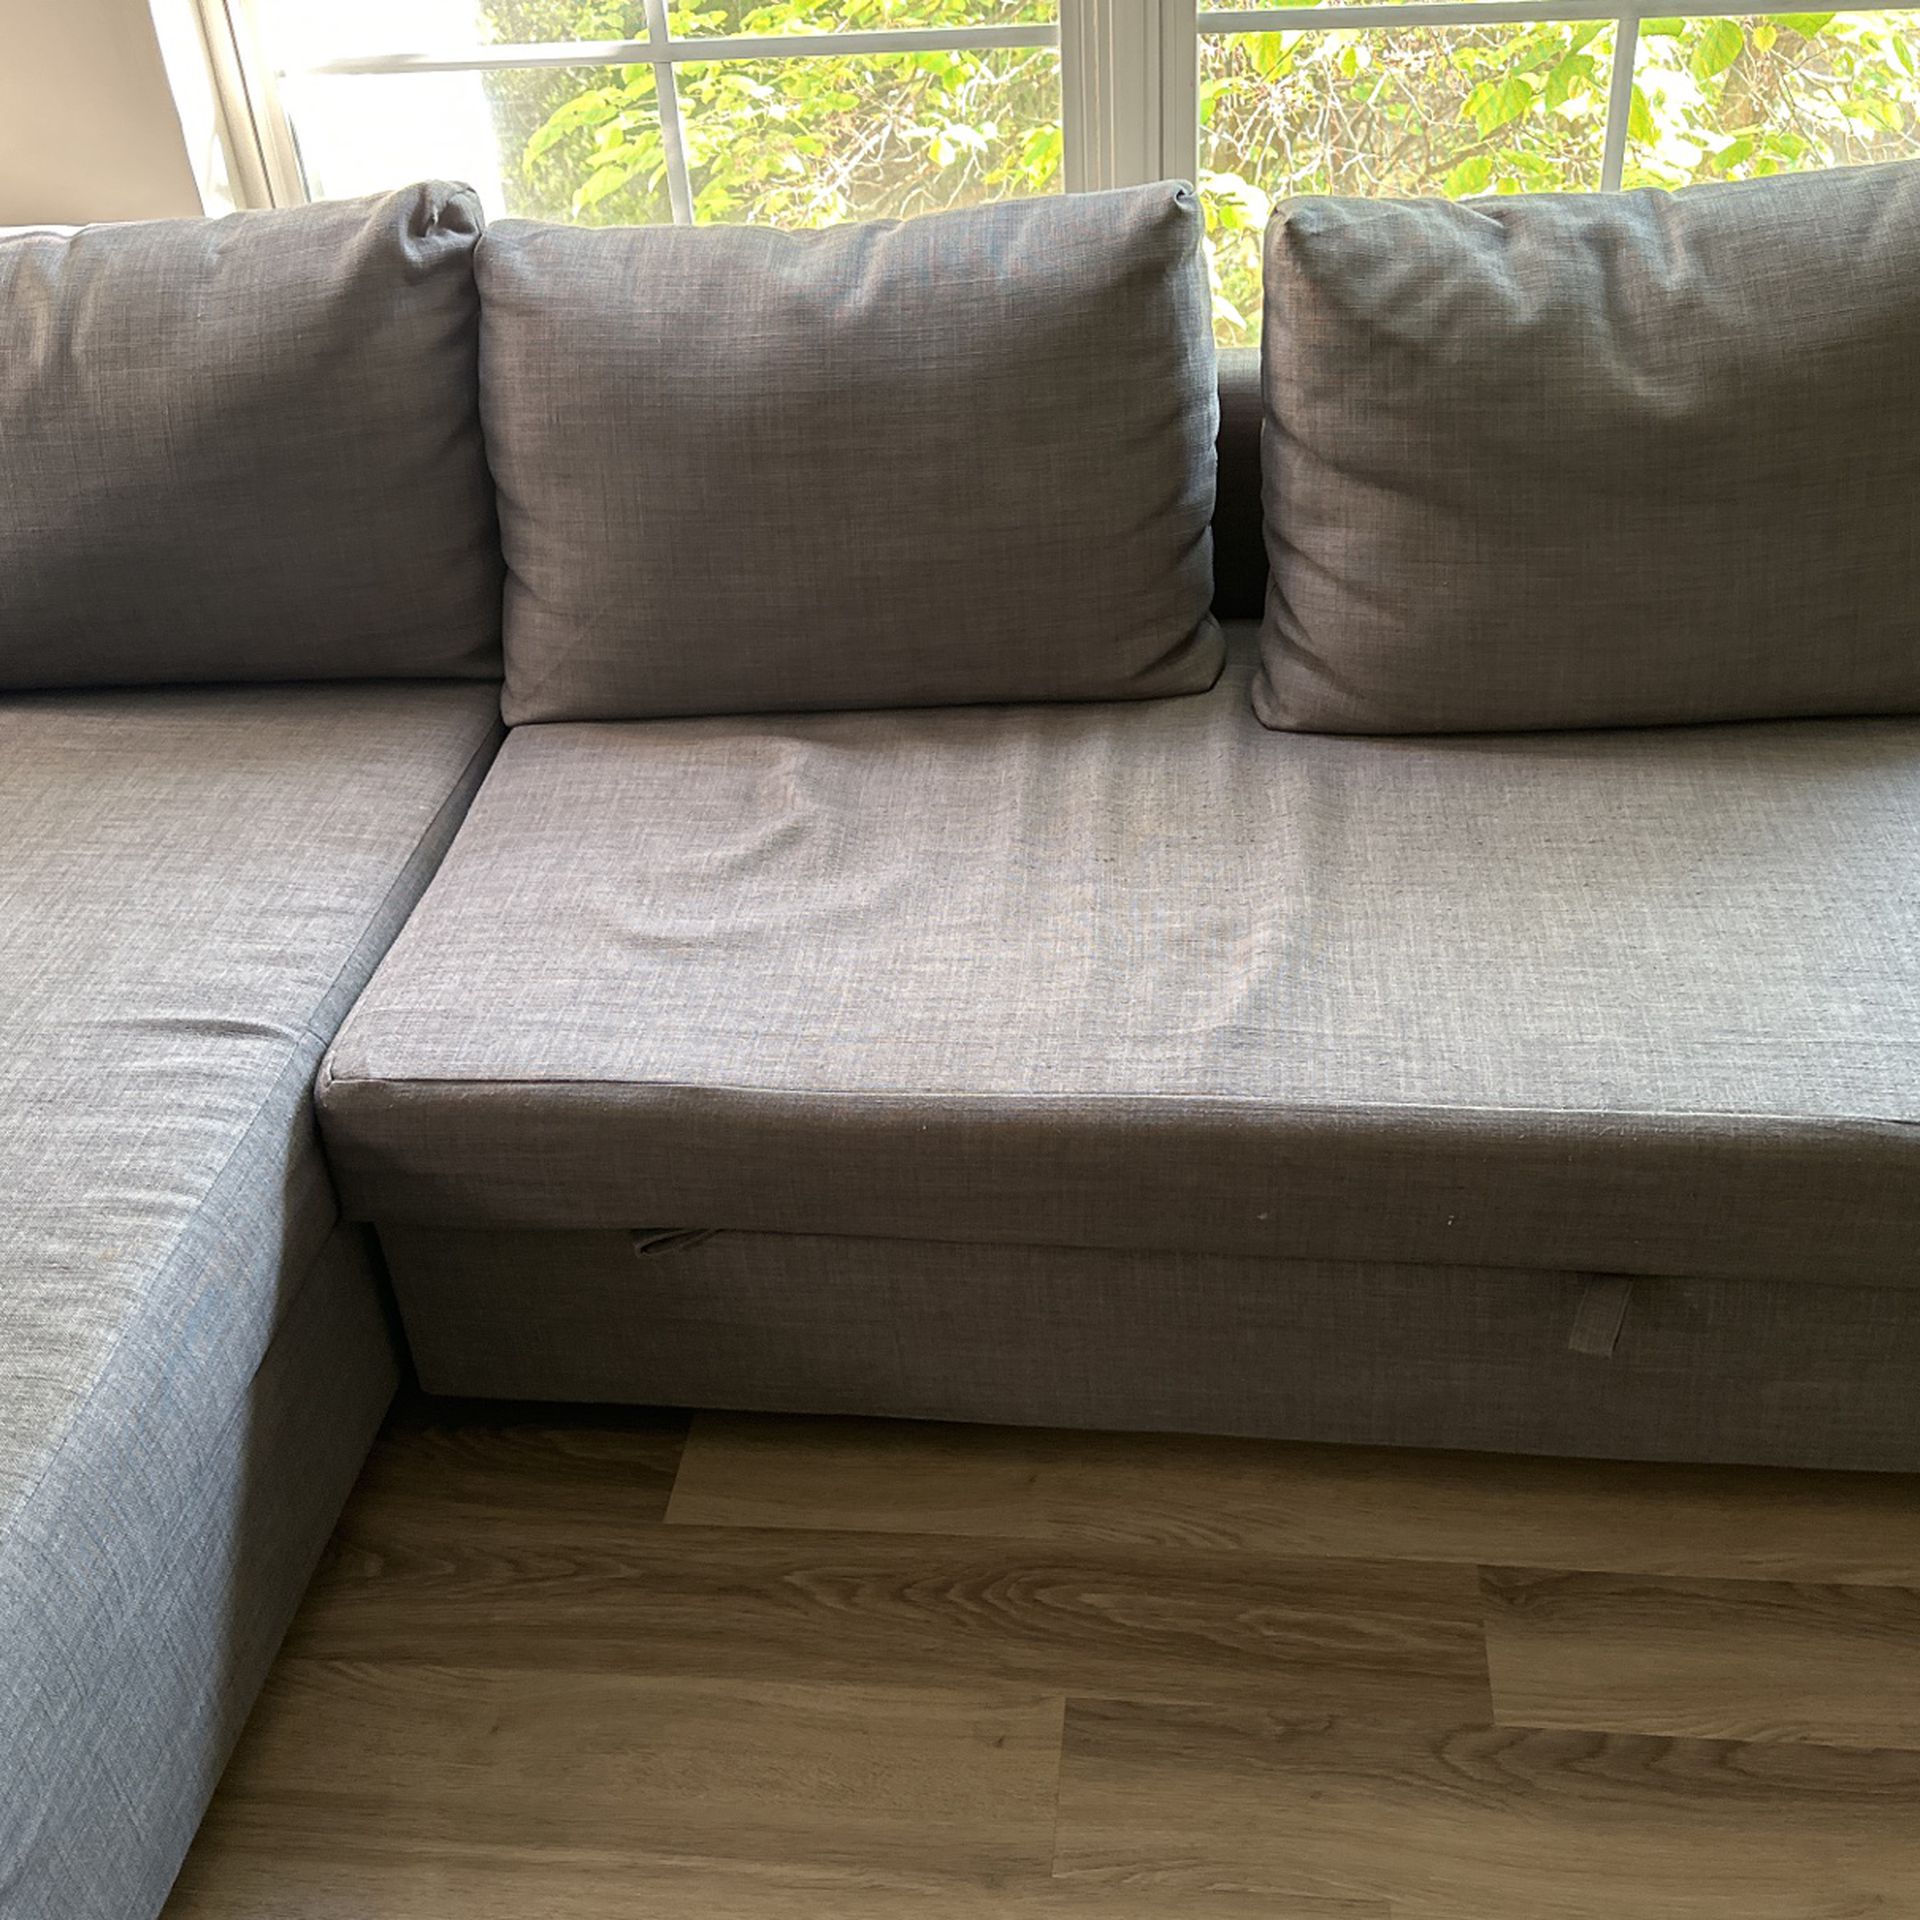 Sleeper sectional,3 seat with storage